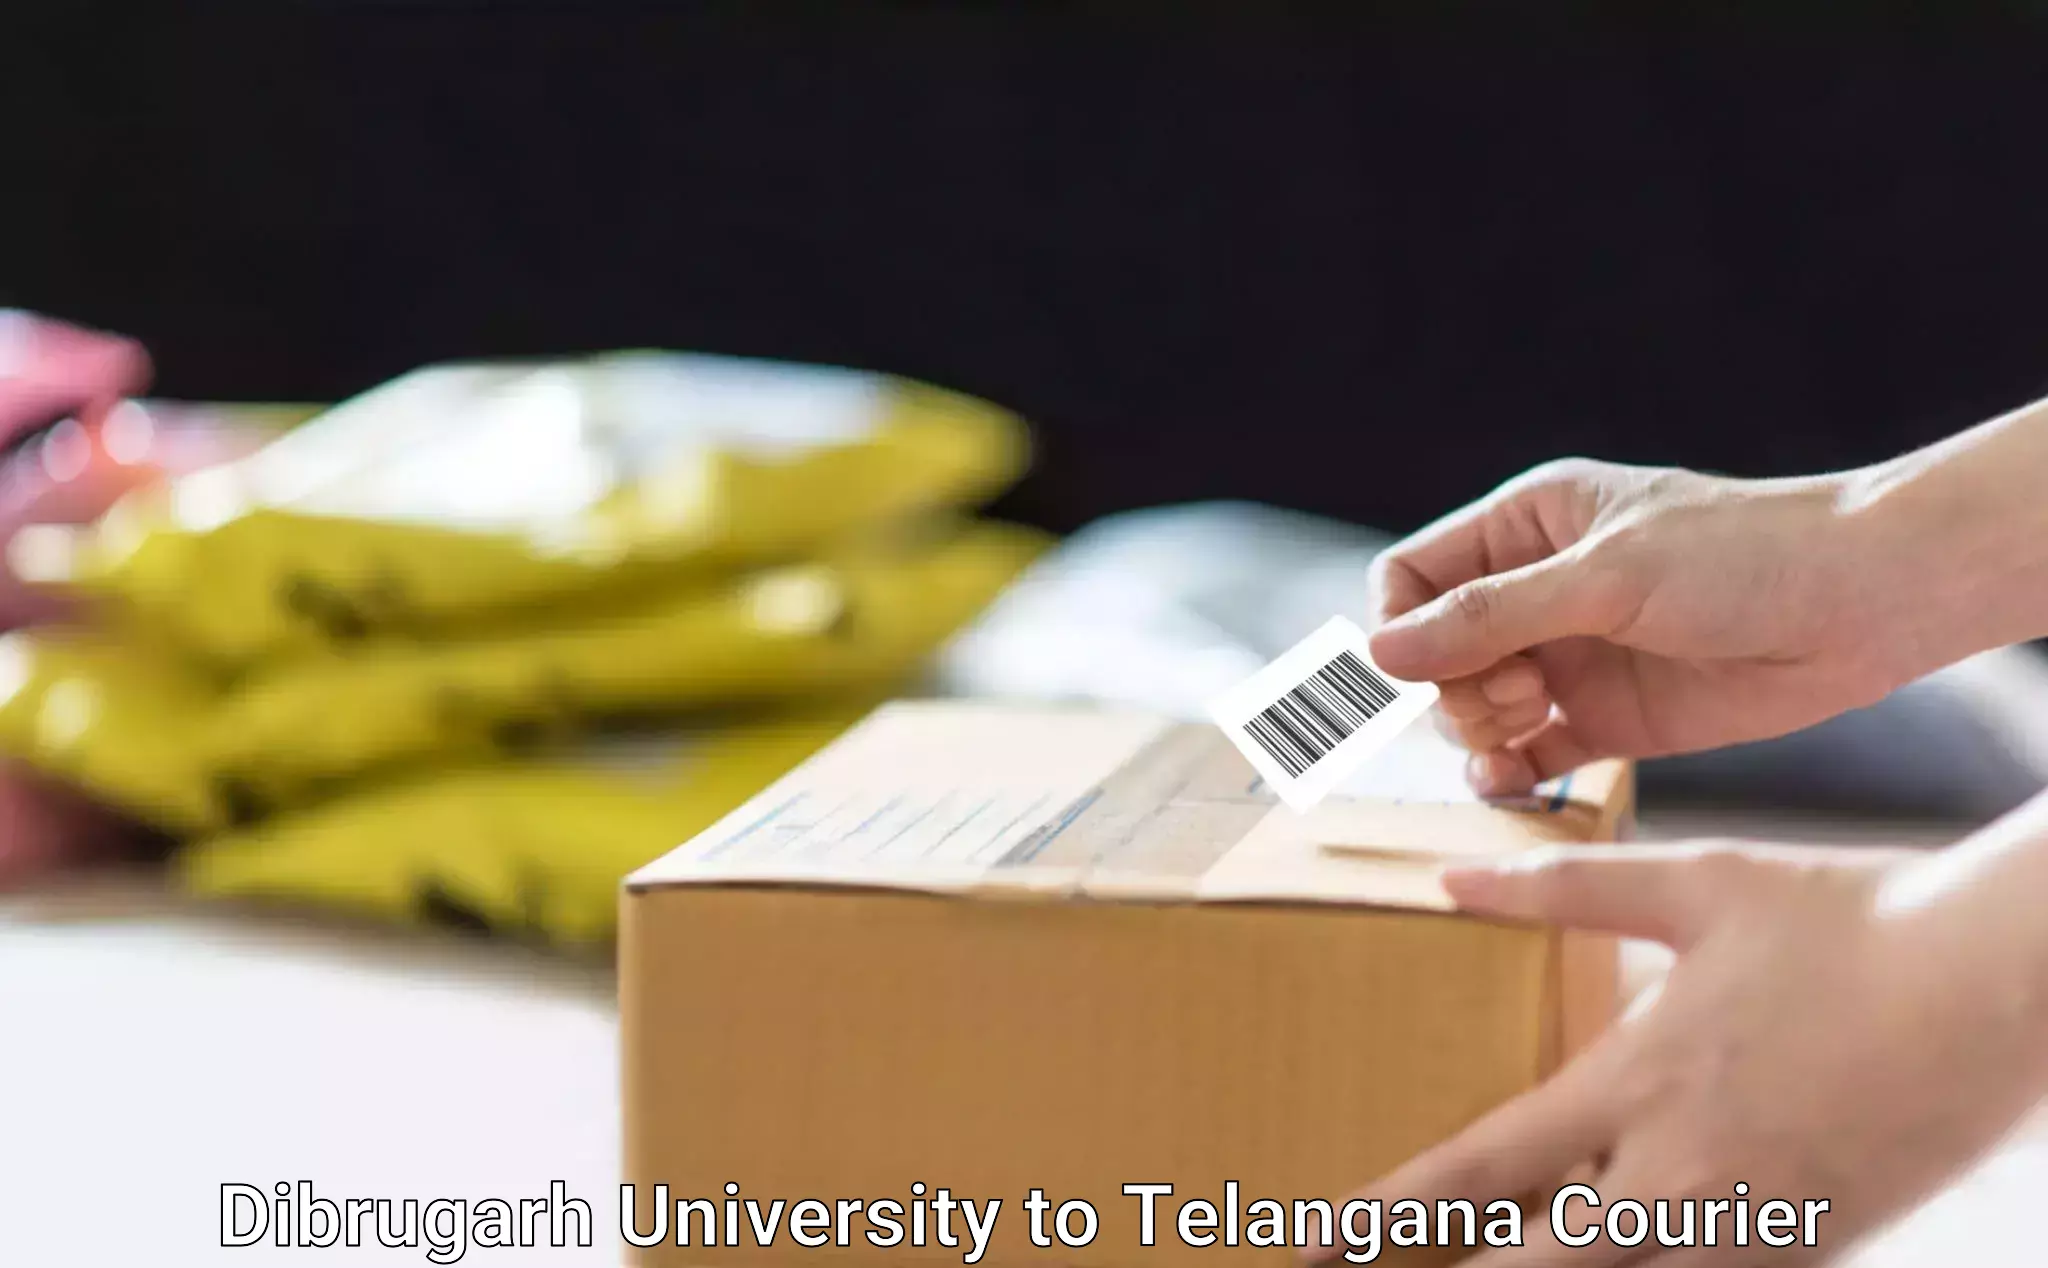 Package delivery network Dibrugarh University to Bejjanki